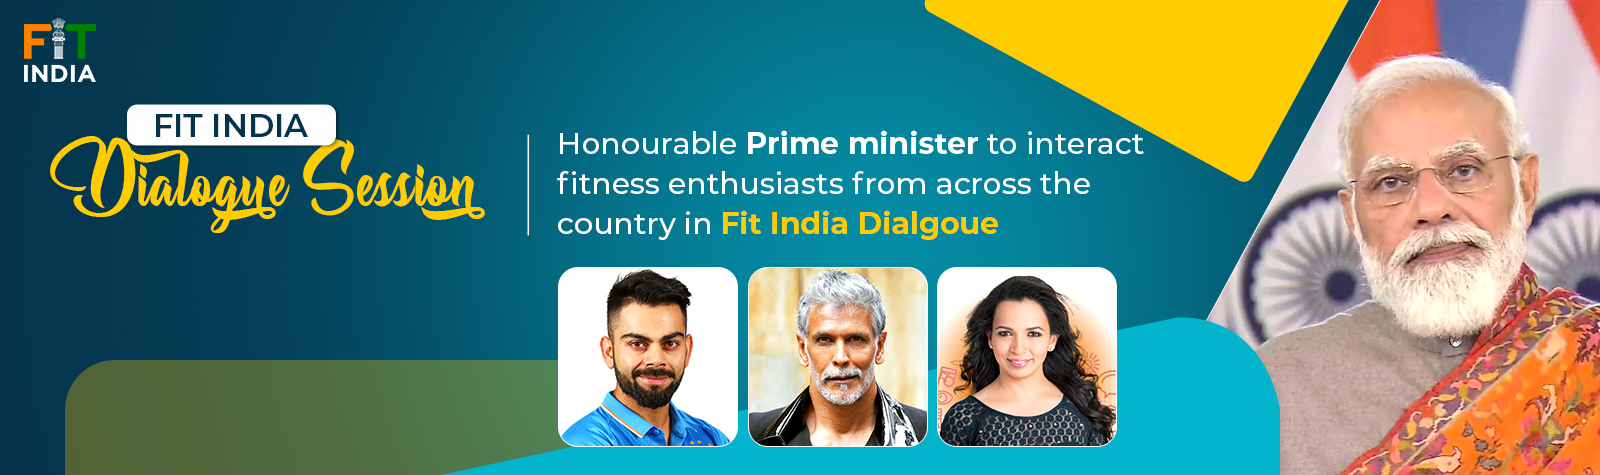 about-fitindia